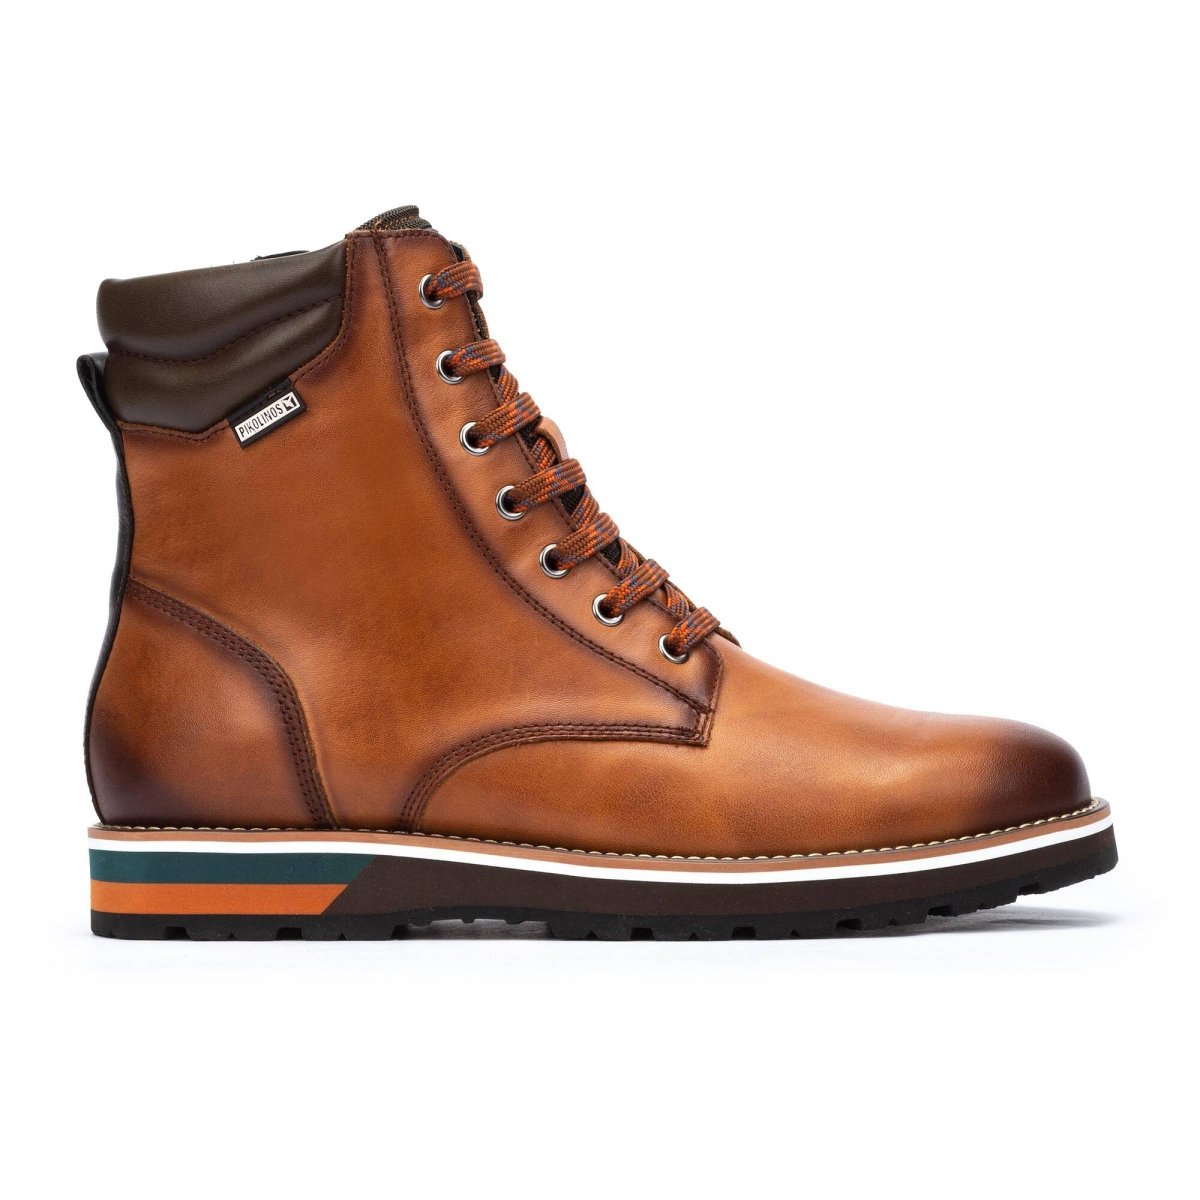 PIKOLINOS PIRINEOS M6S-8113C1 MEN'S LACE-UP ANKLE BOOTS IN BRANDY - TLW Shoes